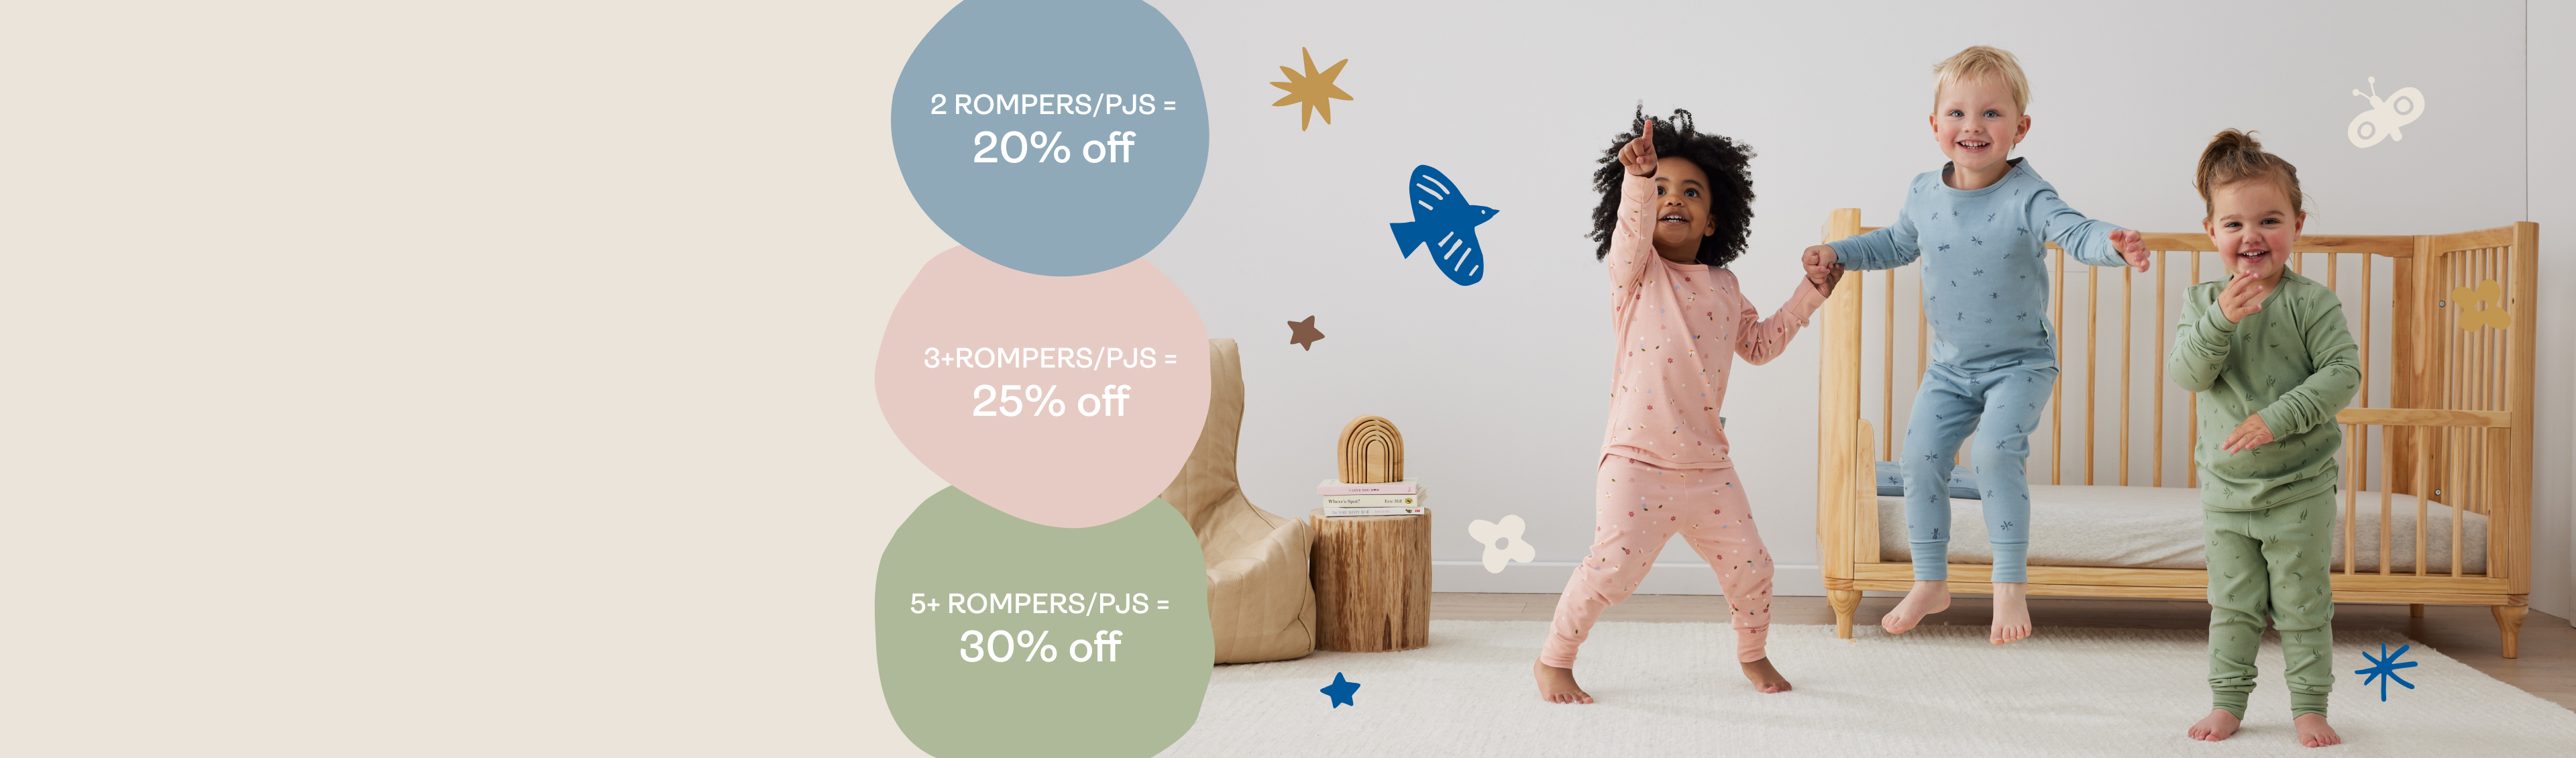 Buy 2 pajamas or rompers, save 20%off, buy 3 save 25%, buy 5 or more save 30%